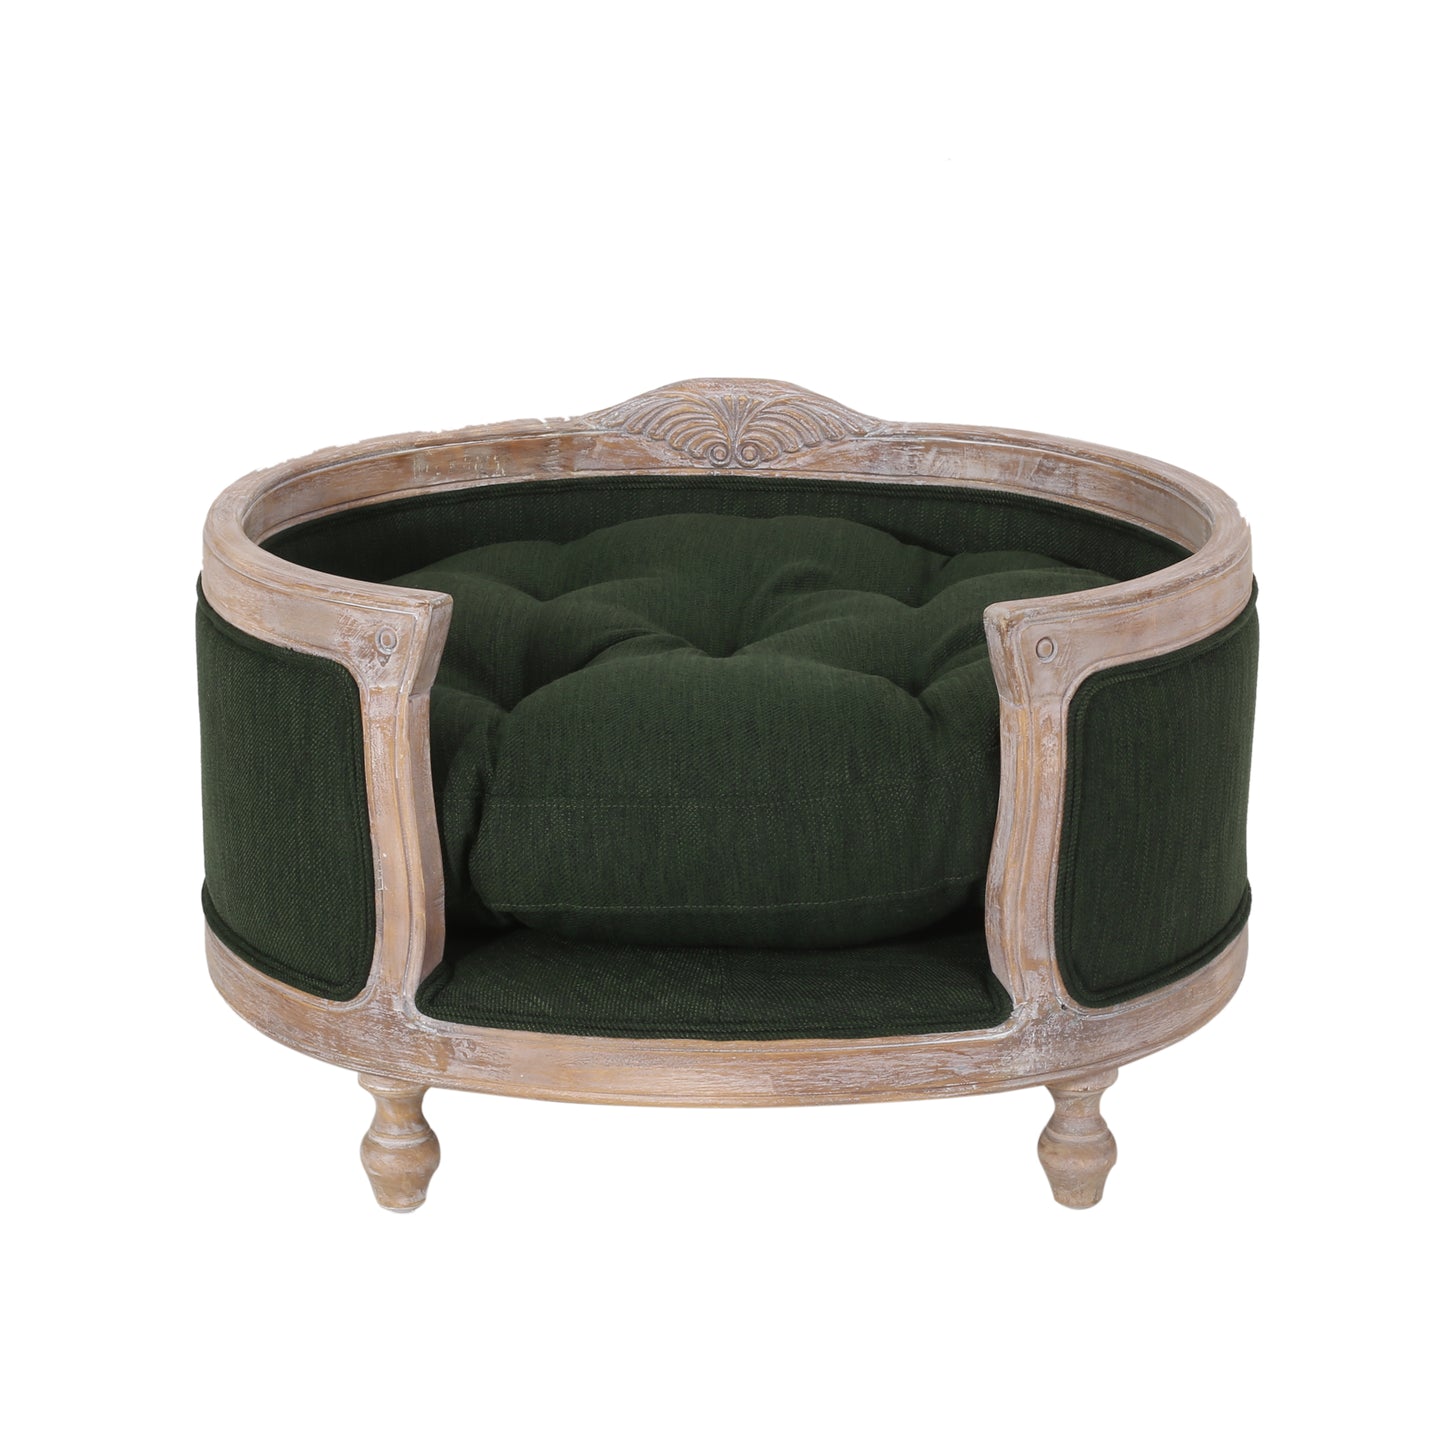 Burgos Contemporary Upholstered Medium Pet Bed with Wood Frame